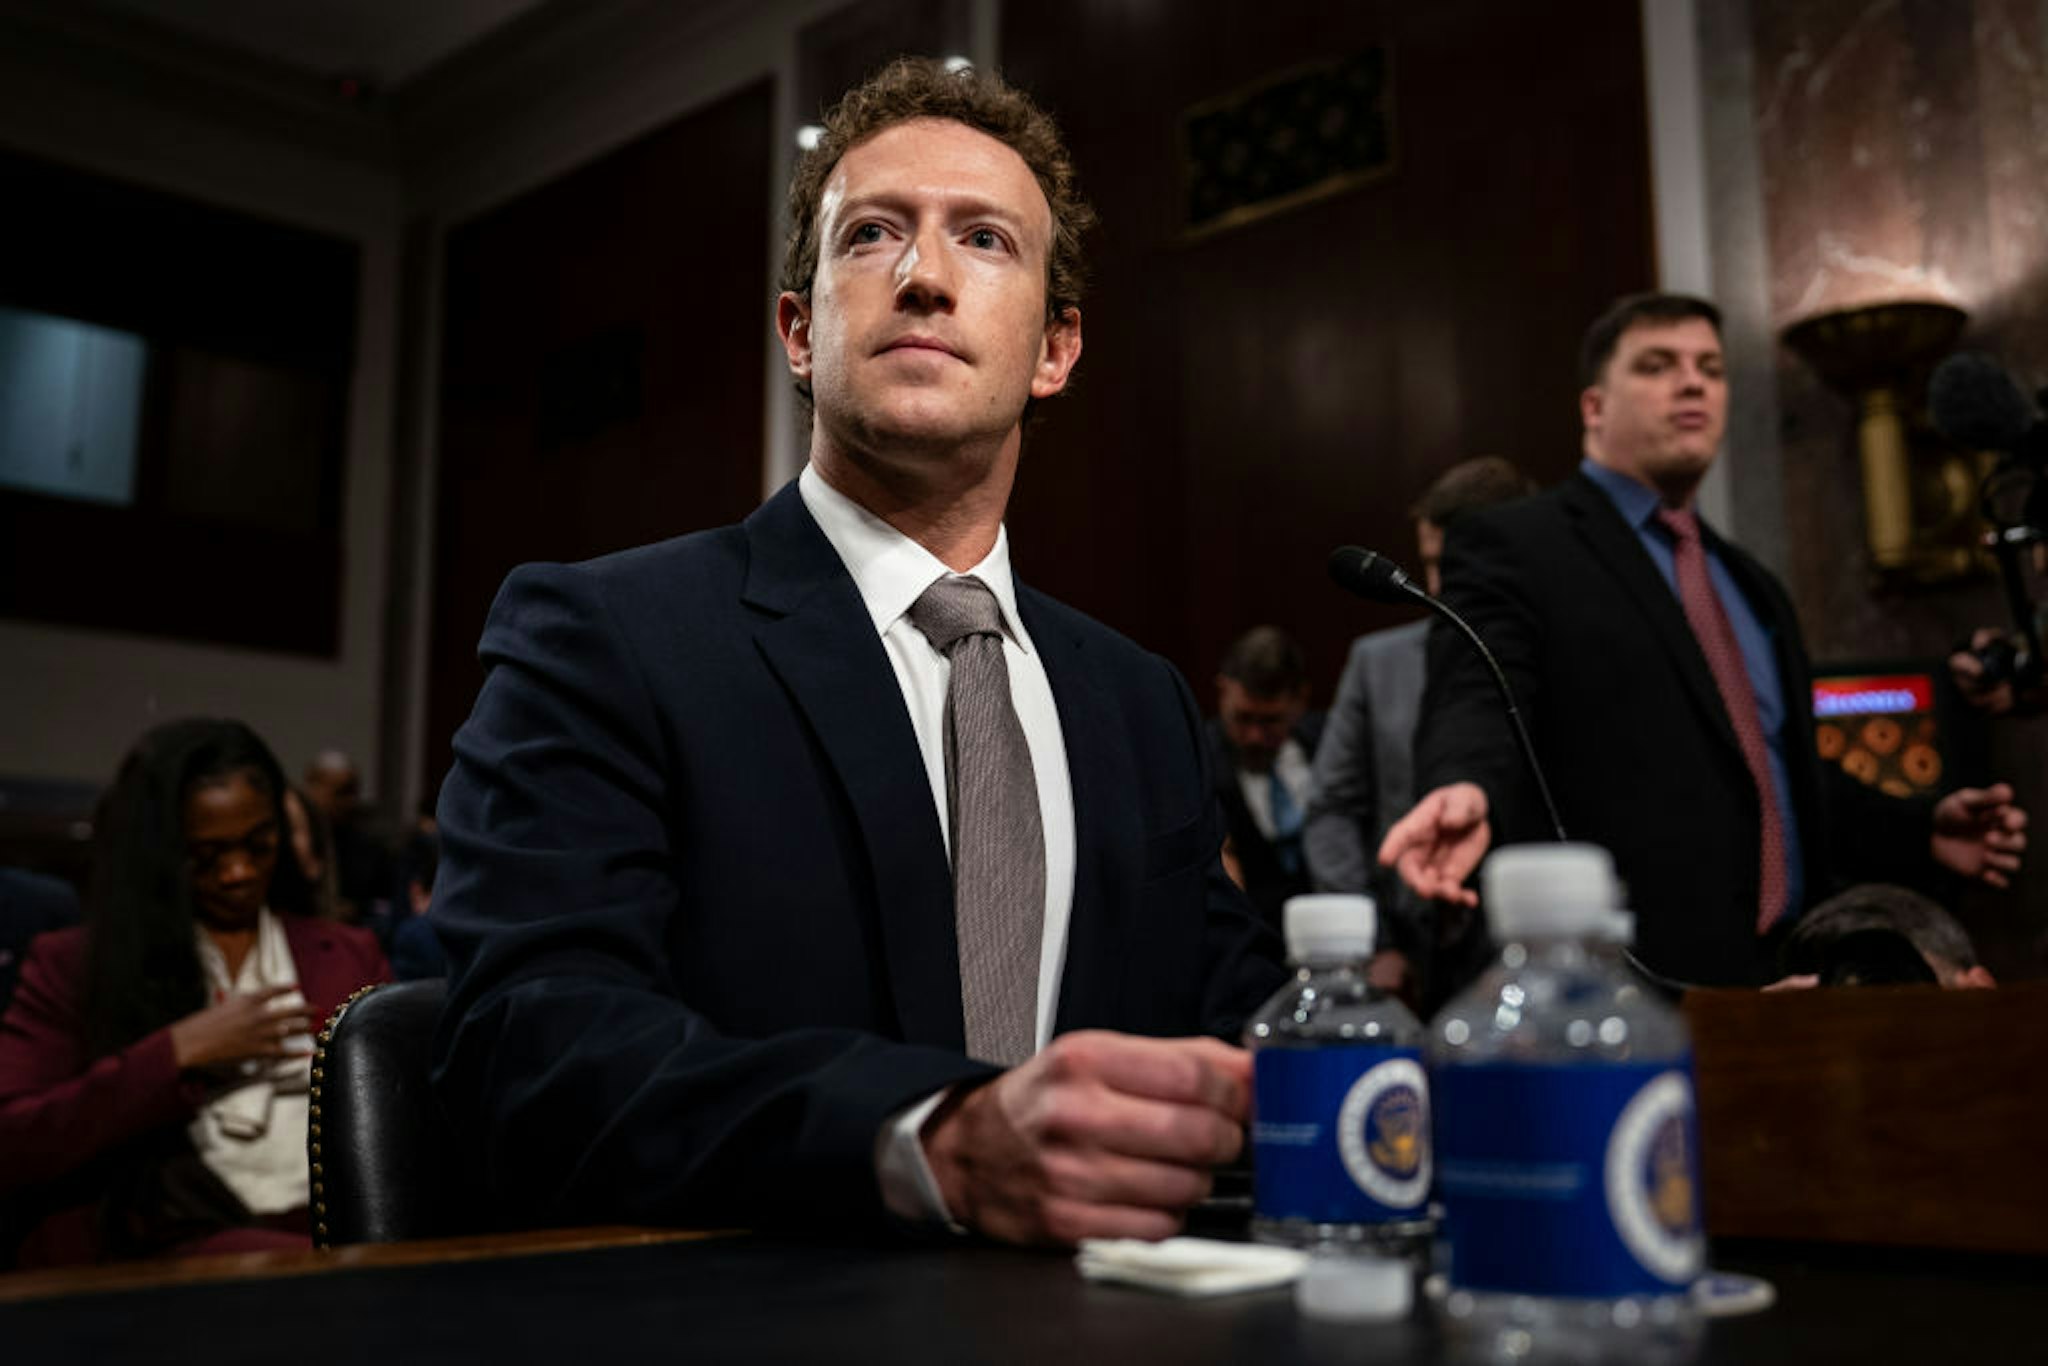 Mark Zuckerberg, chief executive officer of Meta Platforms Inc., center, arrives following a break during a Senate Judiciary Committee hearing in Washington, DC, US, on Wednesday, Jan. 31, 2024. Congress has increasingly scrutinized social media platforms as growing evidence suggests that excessive use and the proliferation of harmful content may be damaging young people's mental health. Photographer: Kent Nishimura/Bloomberg via Getty Images